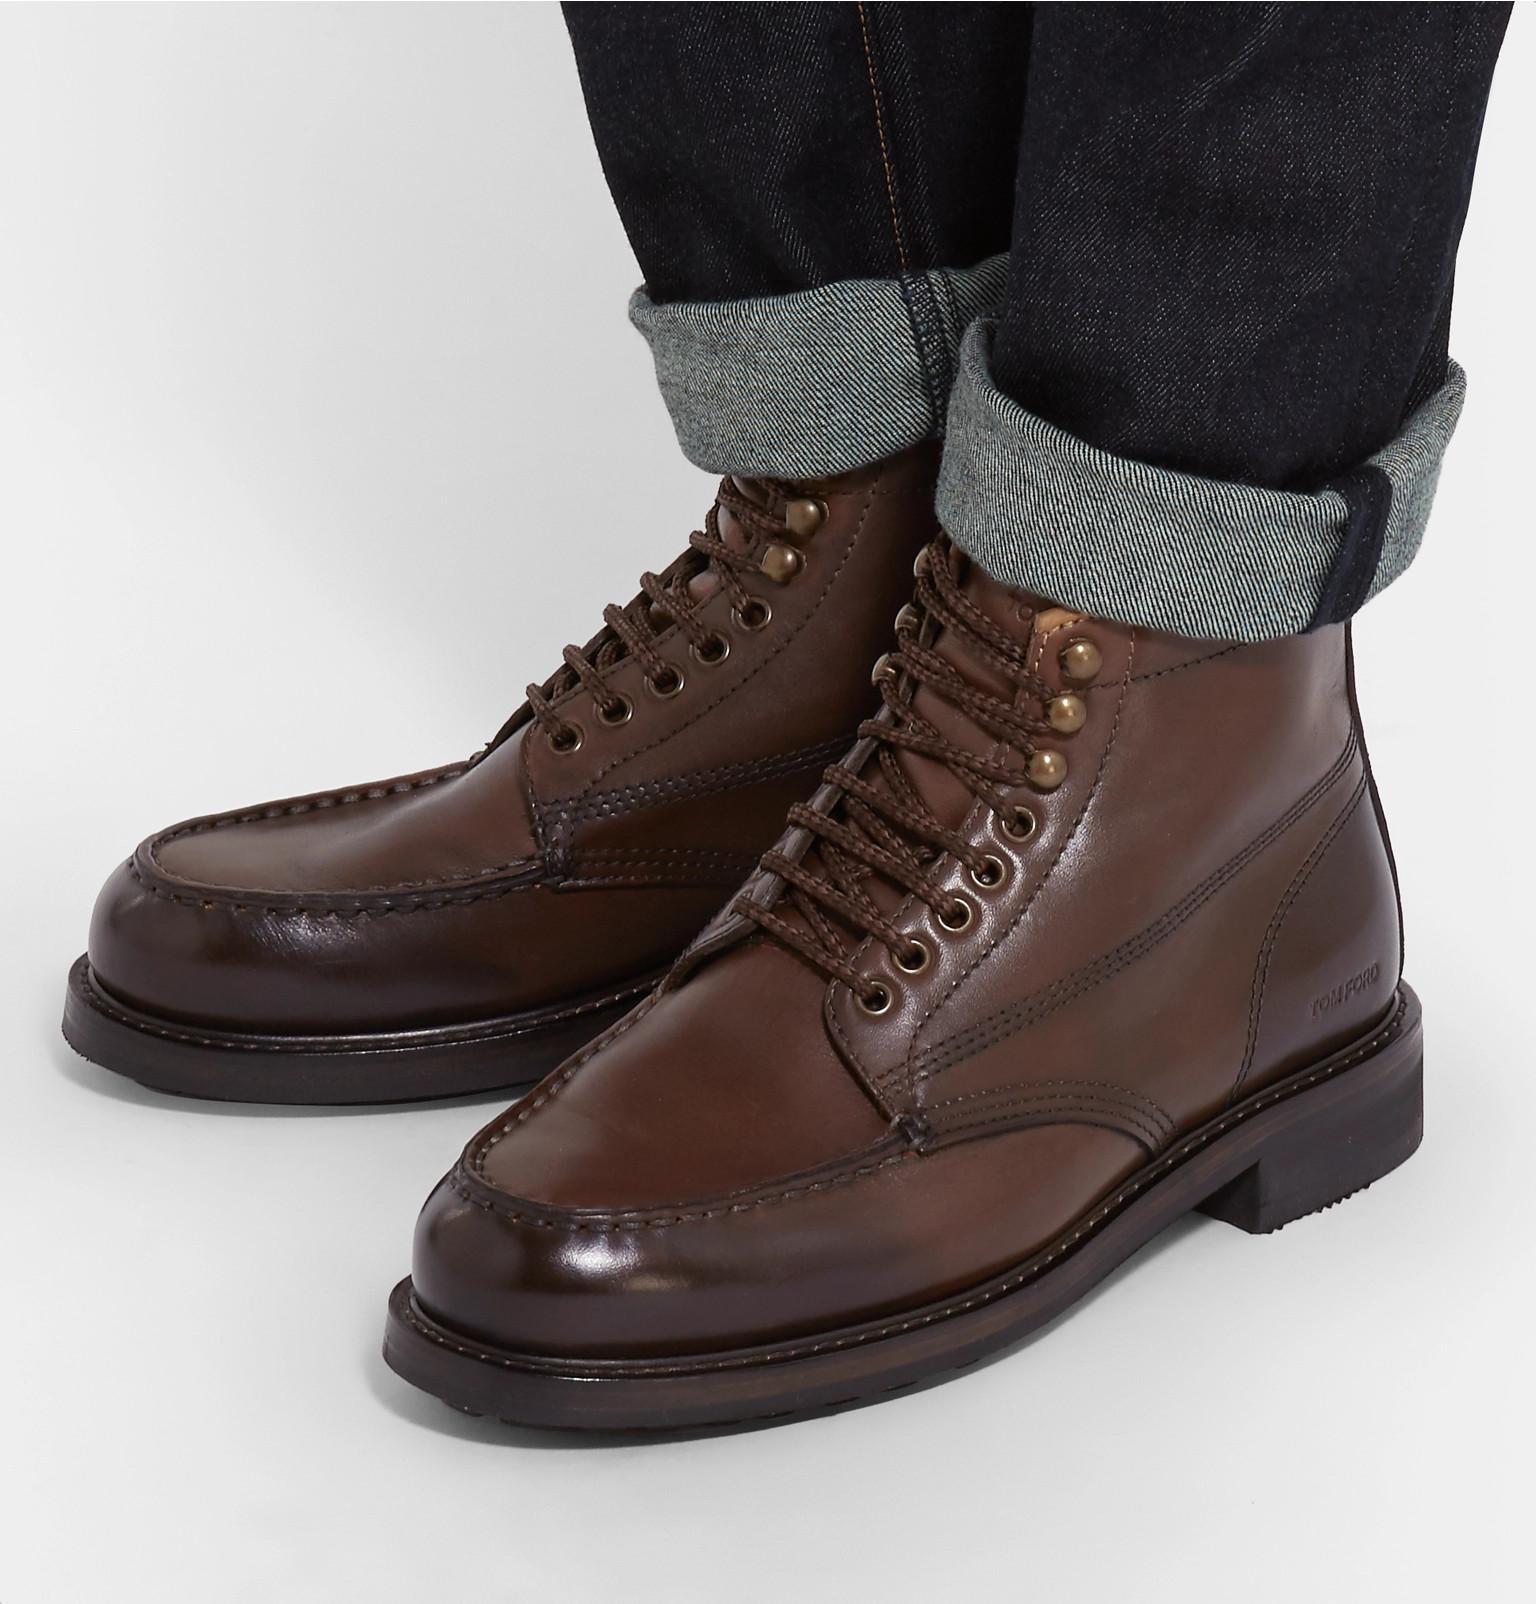 Tom Ford Burnished-leather Hiking Boots in Brown for Men - Lyst